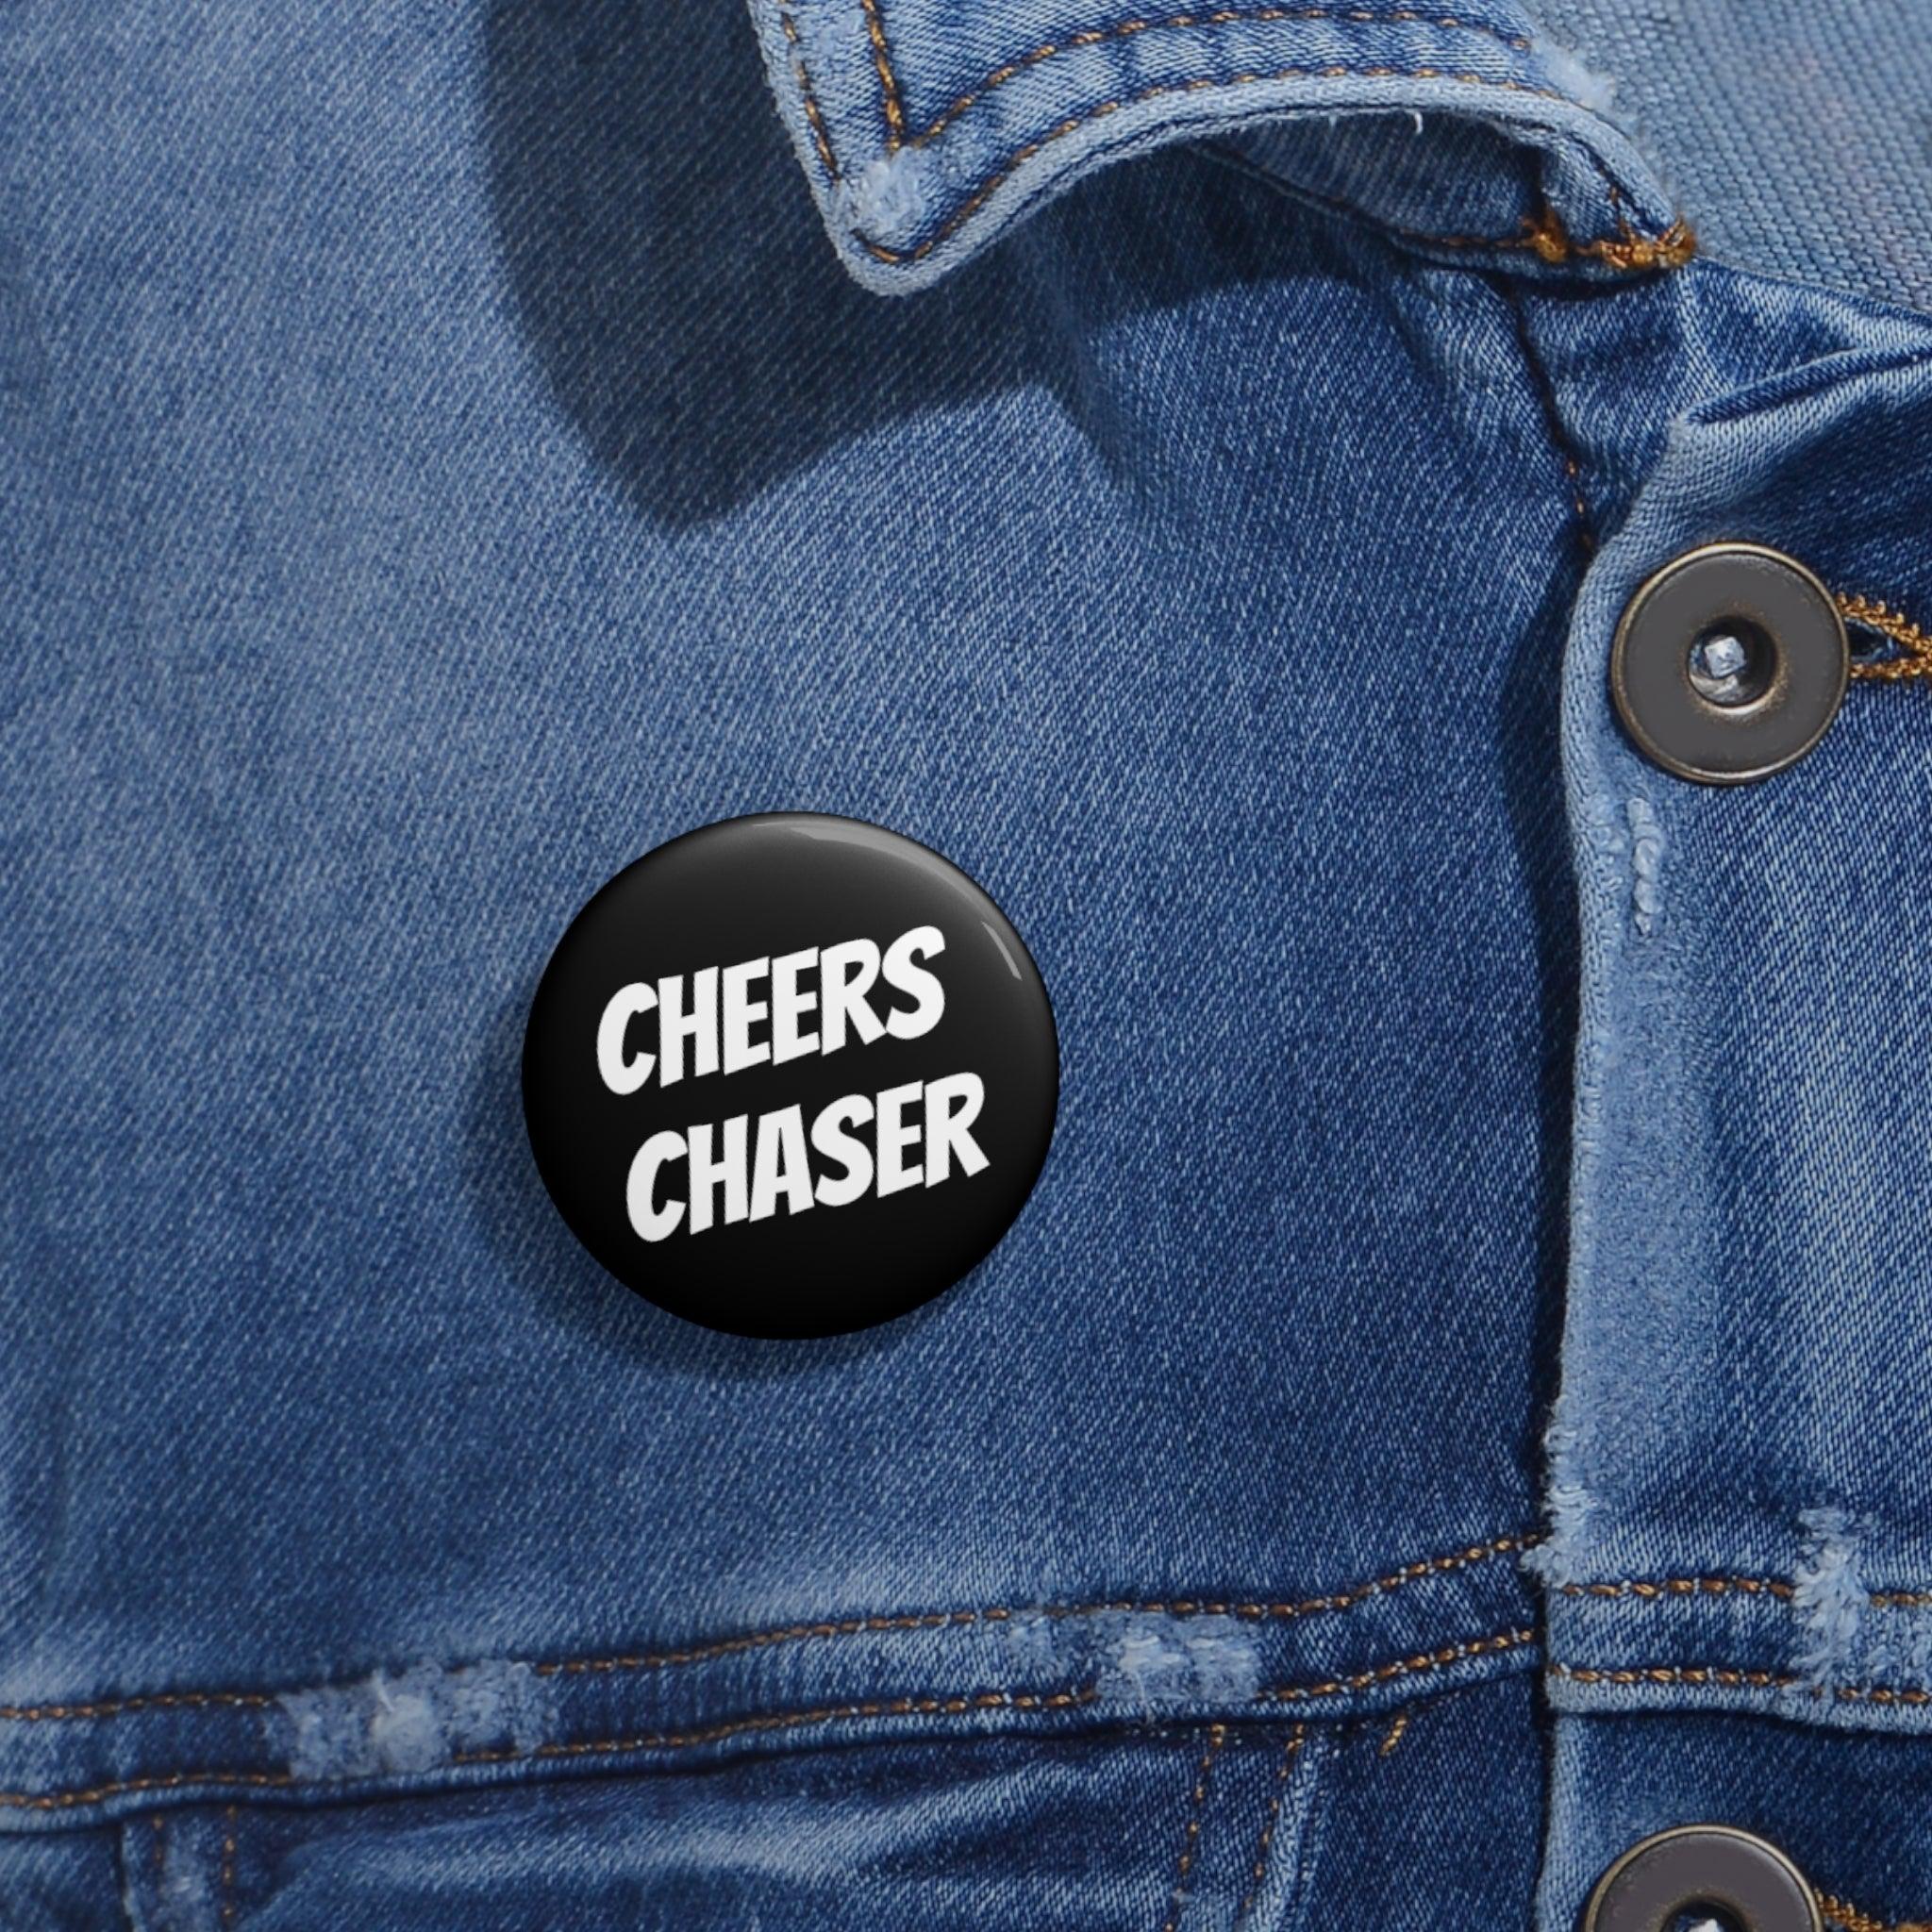 Cheers Chaser Pin Buttons